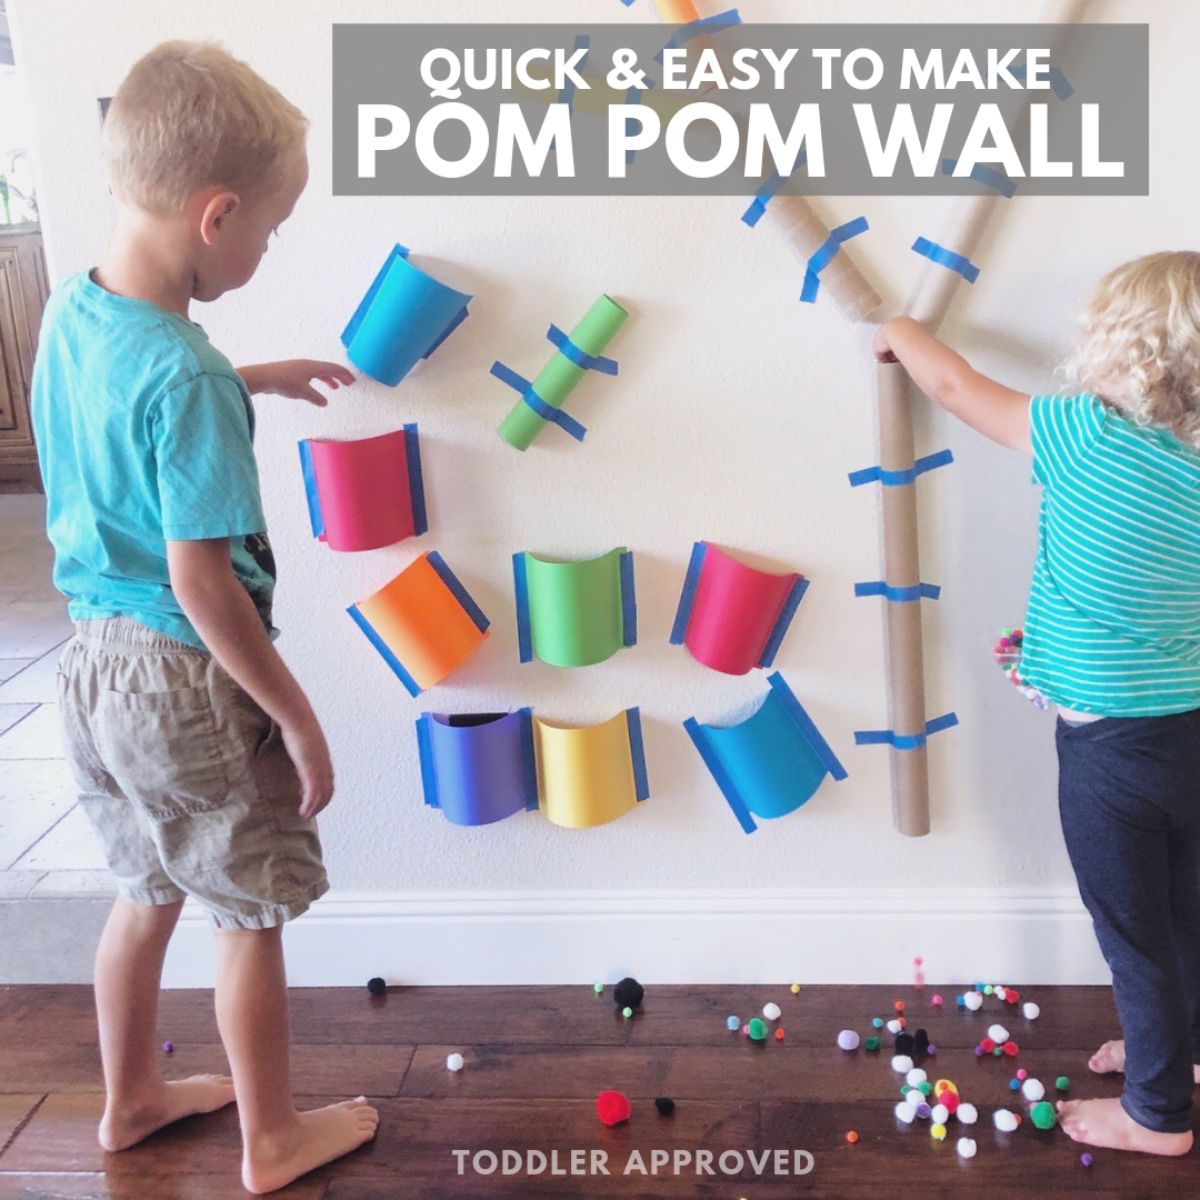 the text reads "Quick & Easy to make pom pom wall" the image s of 2 children standing in front of a wall. The wall has tubes of cardboard taped to it and pom poms are scattered over the floor